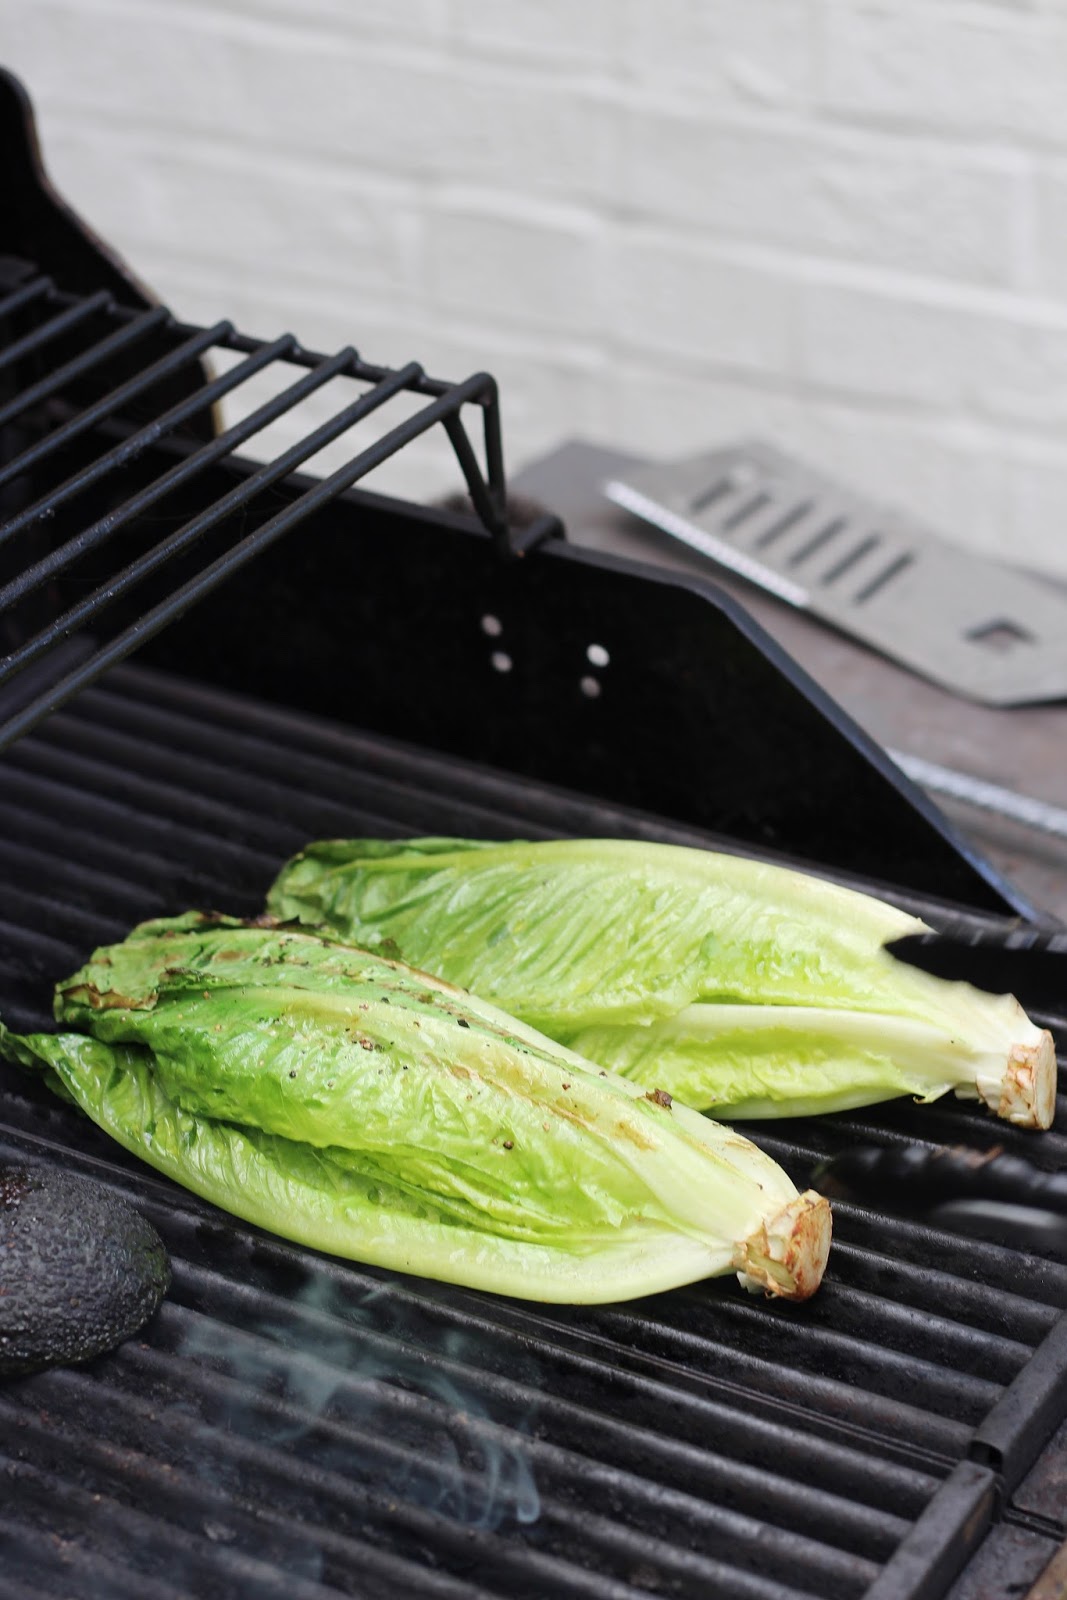 Grilled Steak and Romaine Salad